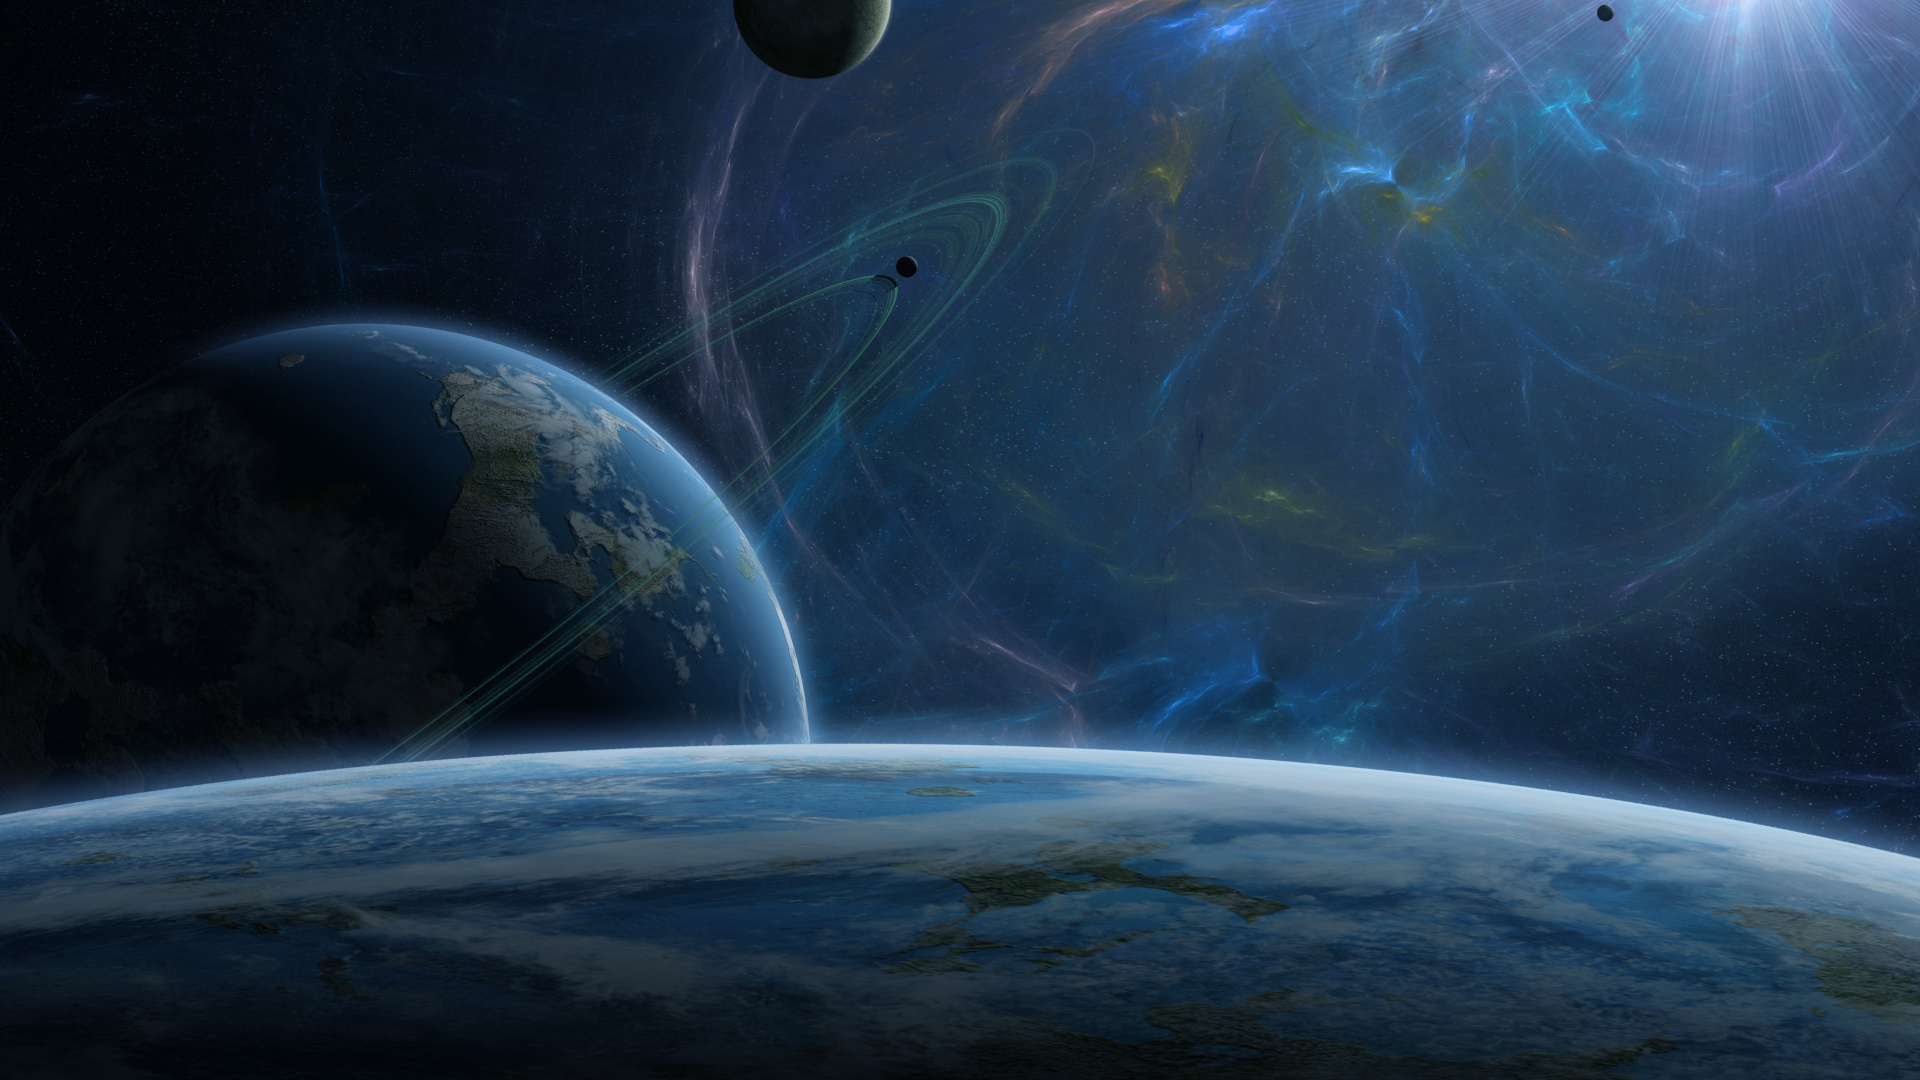 Blue and White Planet Illustration. Wallpaper in 1920x1080 Resolution